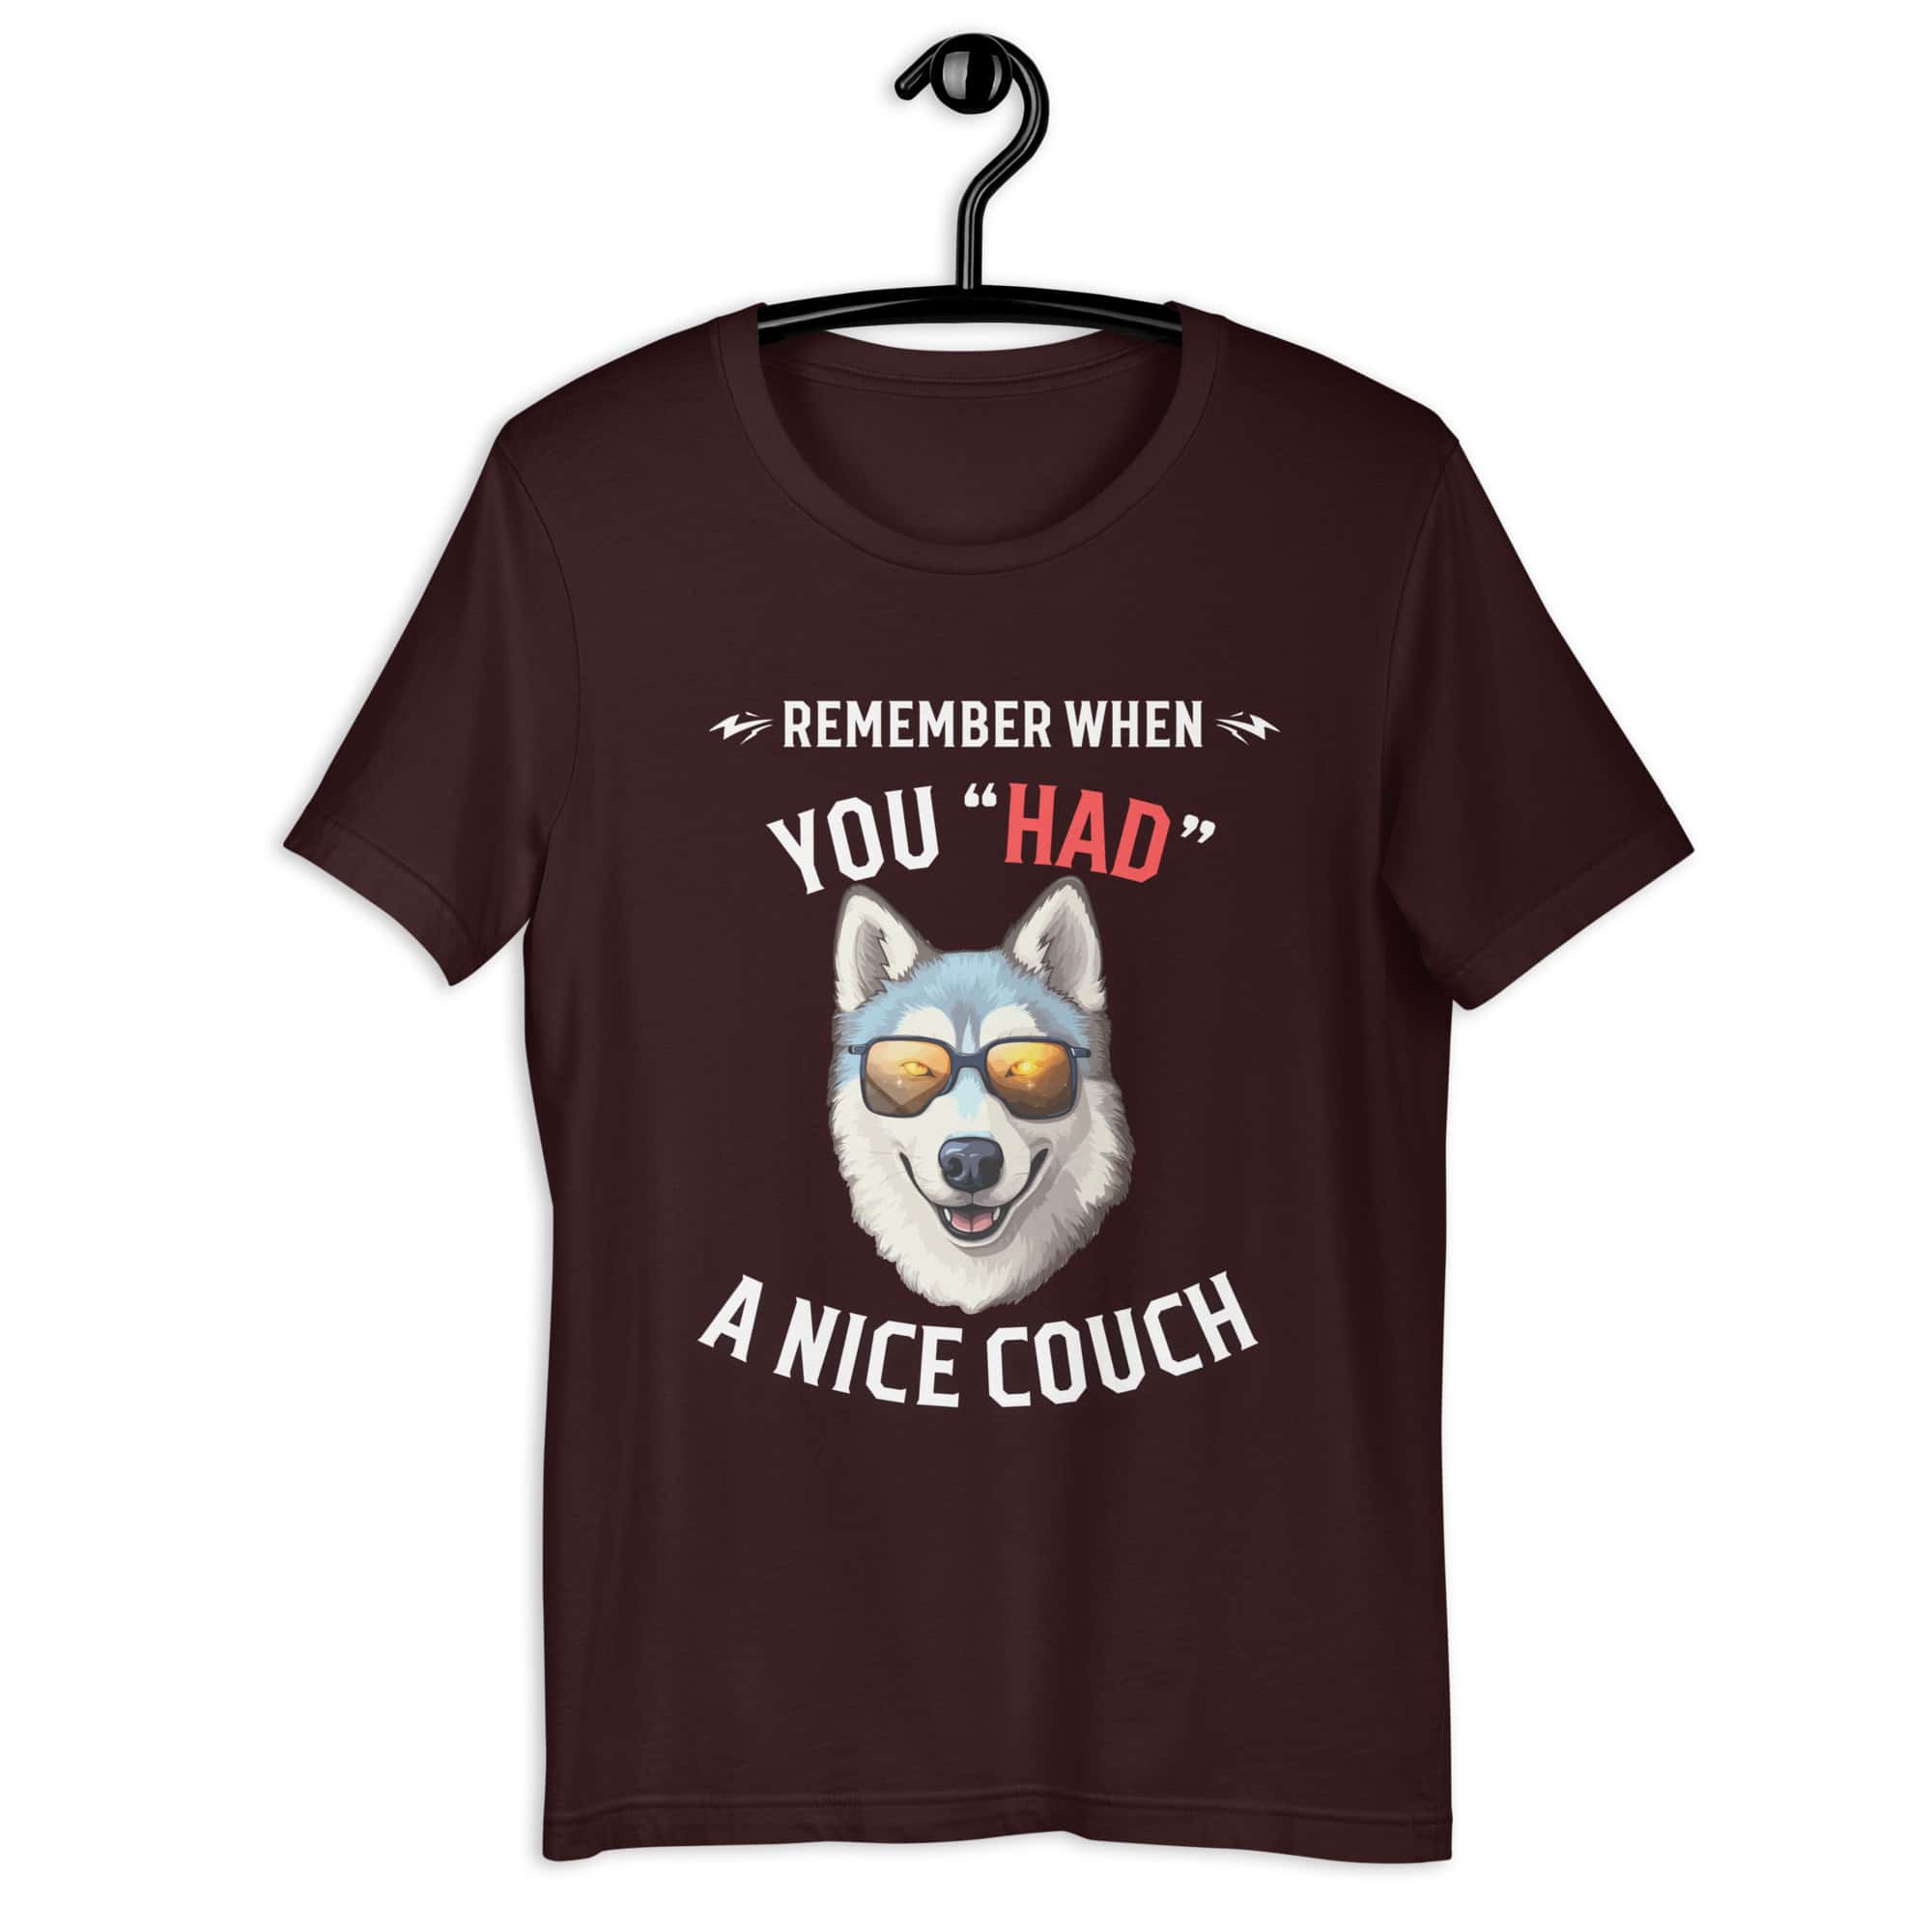 "Remember When You Had A Nice Couch" Husky Unisex T-Shirt brown